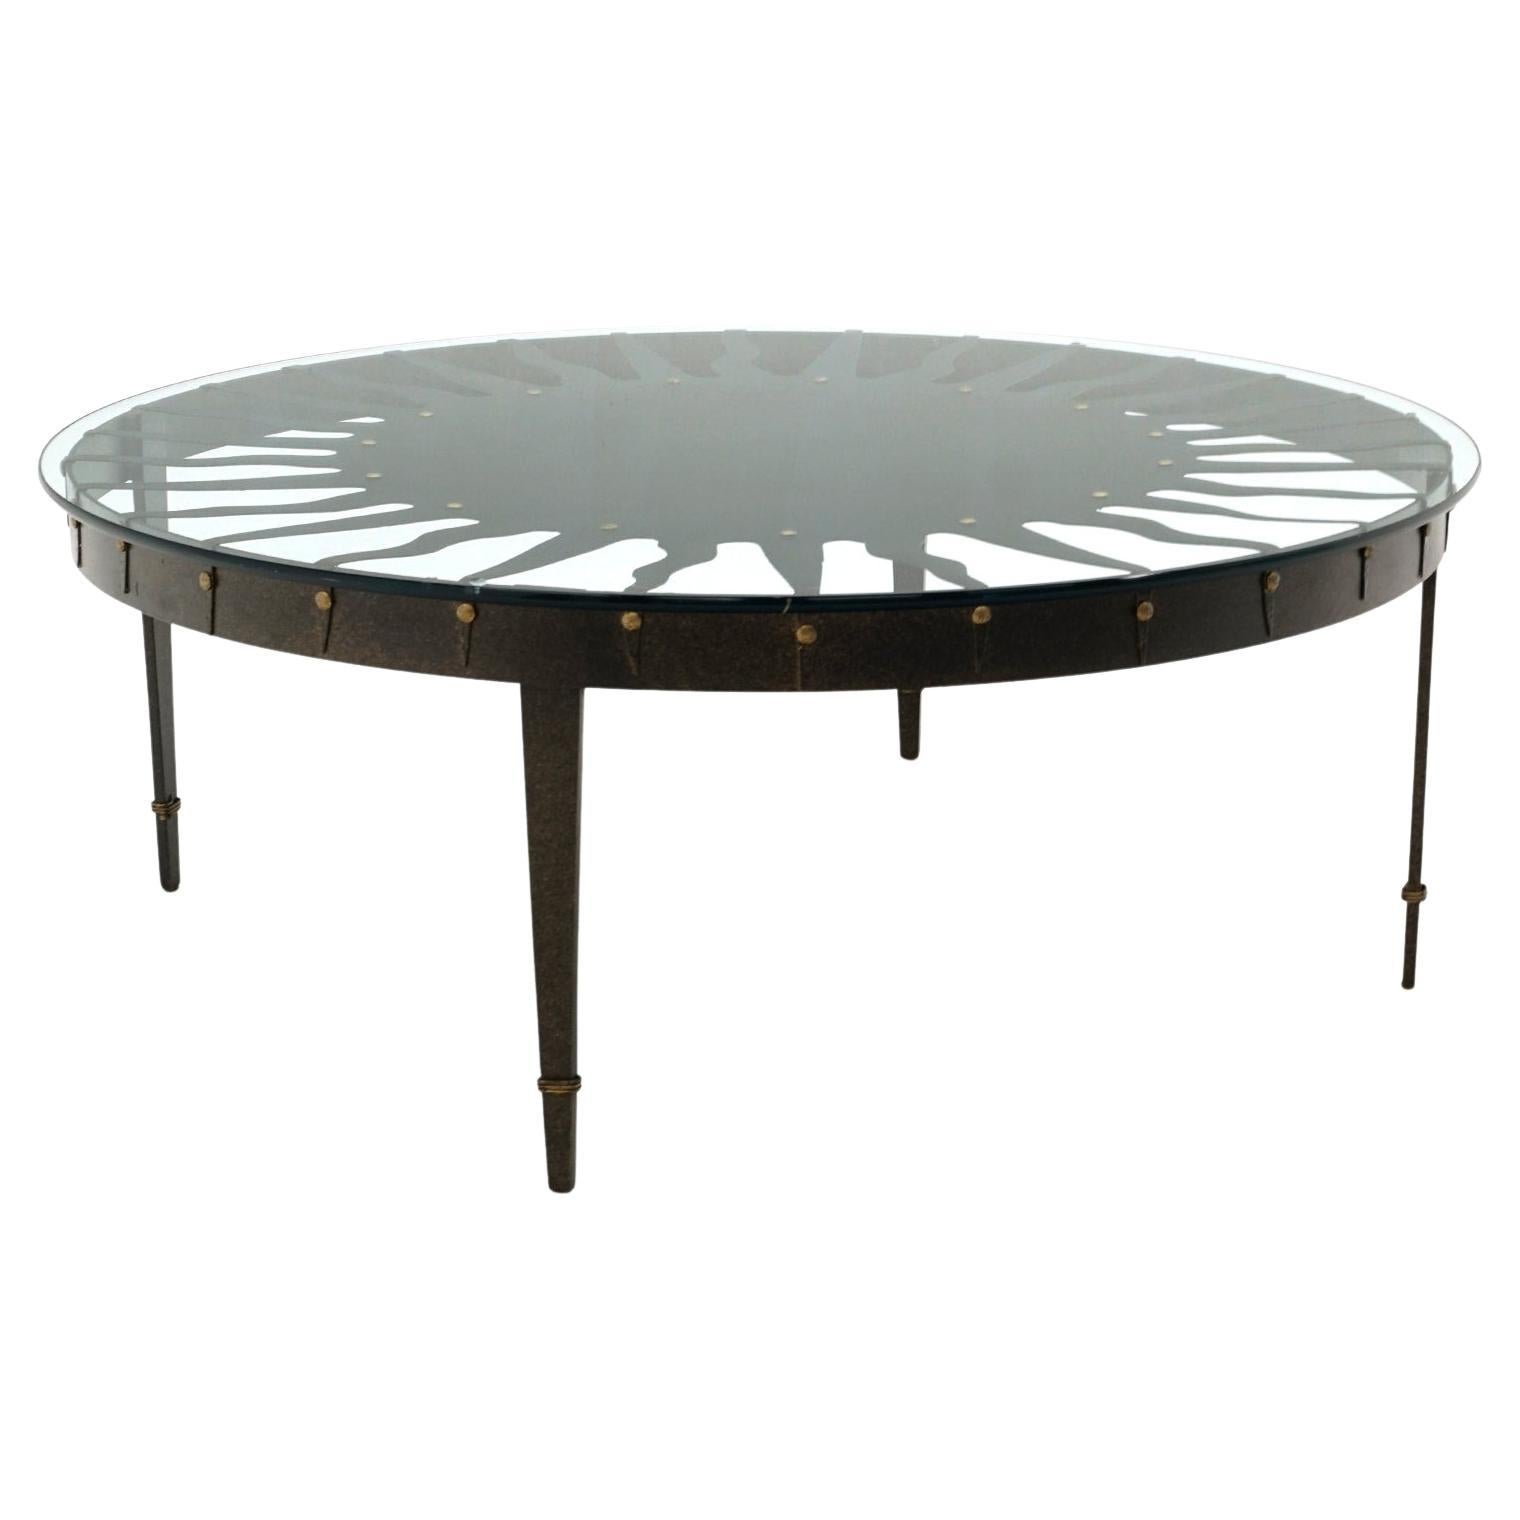 Large Round Sunburst Coffee Table.  Iron Base and Glass Top.  Great Condition